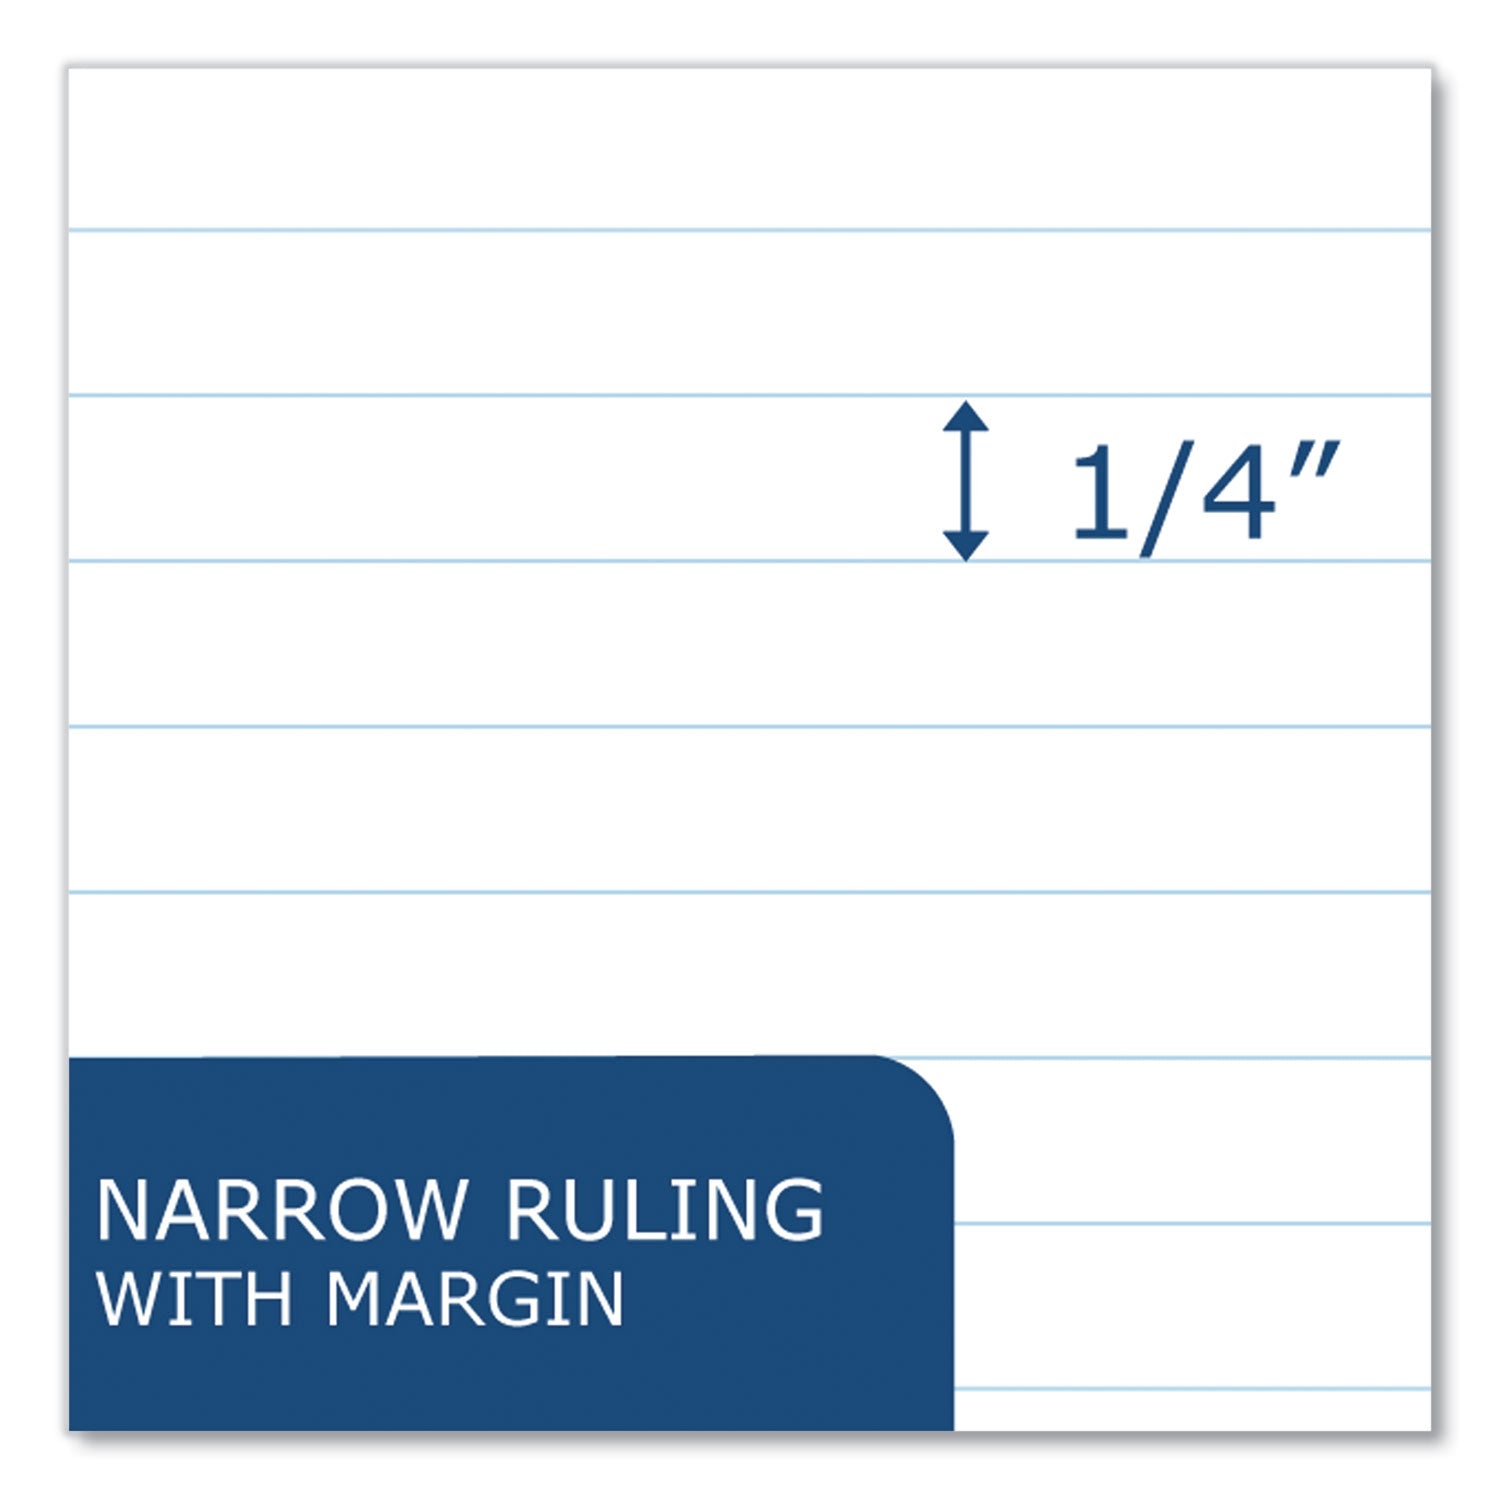 stasher-wirebound-notebooks-1-subject-narrow-rule-randomly-asst-cover-100-11x9-sheets-24-ct-ships-in-4-6-bus-days_roa11097cs - 7